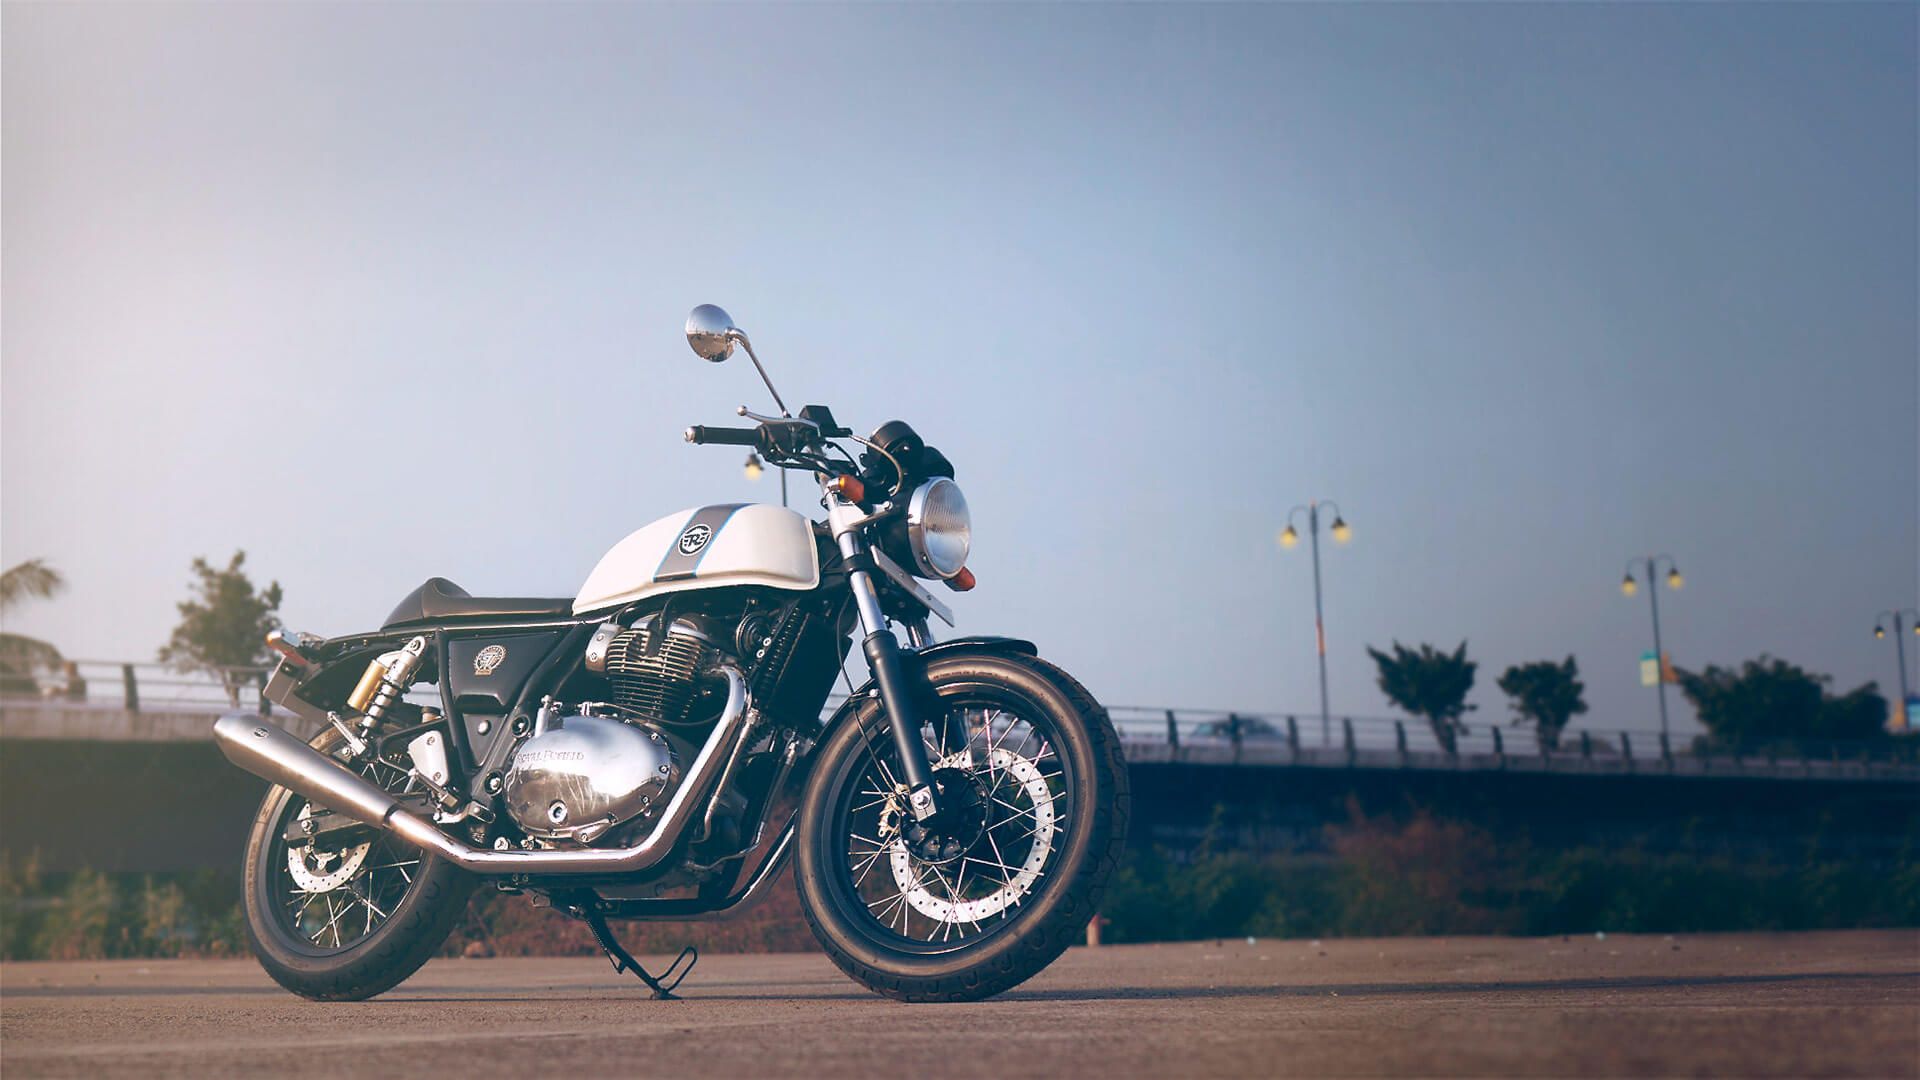 White Royal Enfield Continental GT 650 posed for a shot against the sky